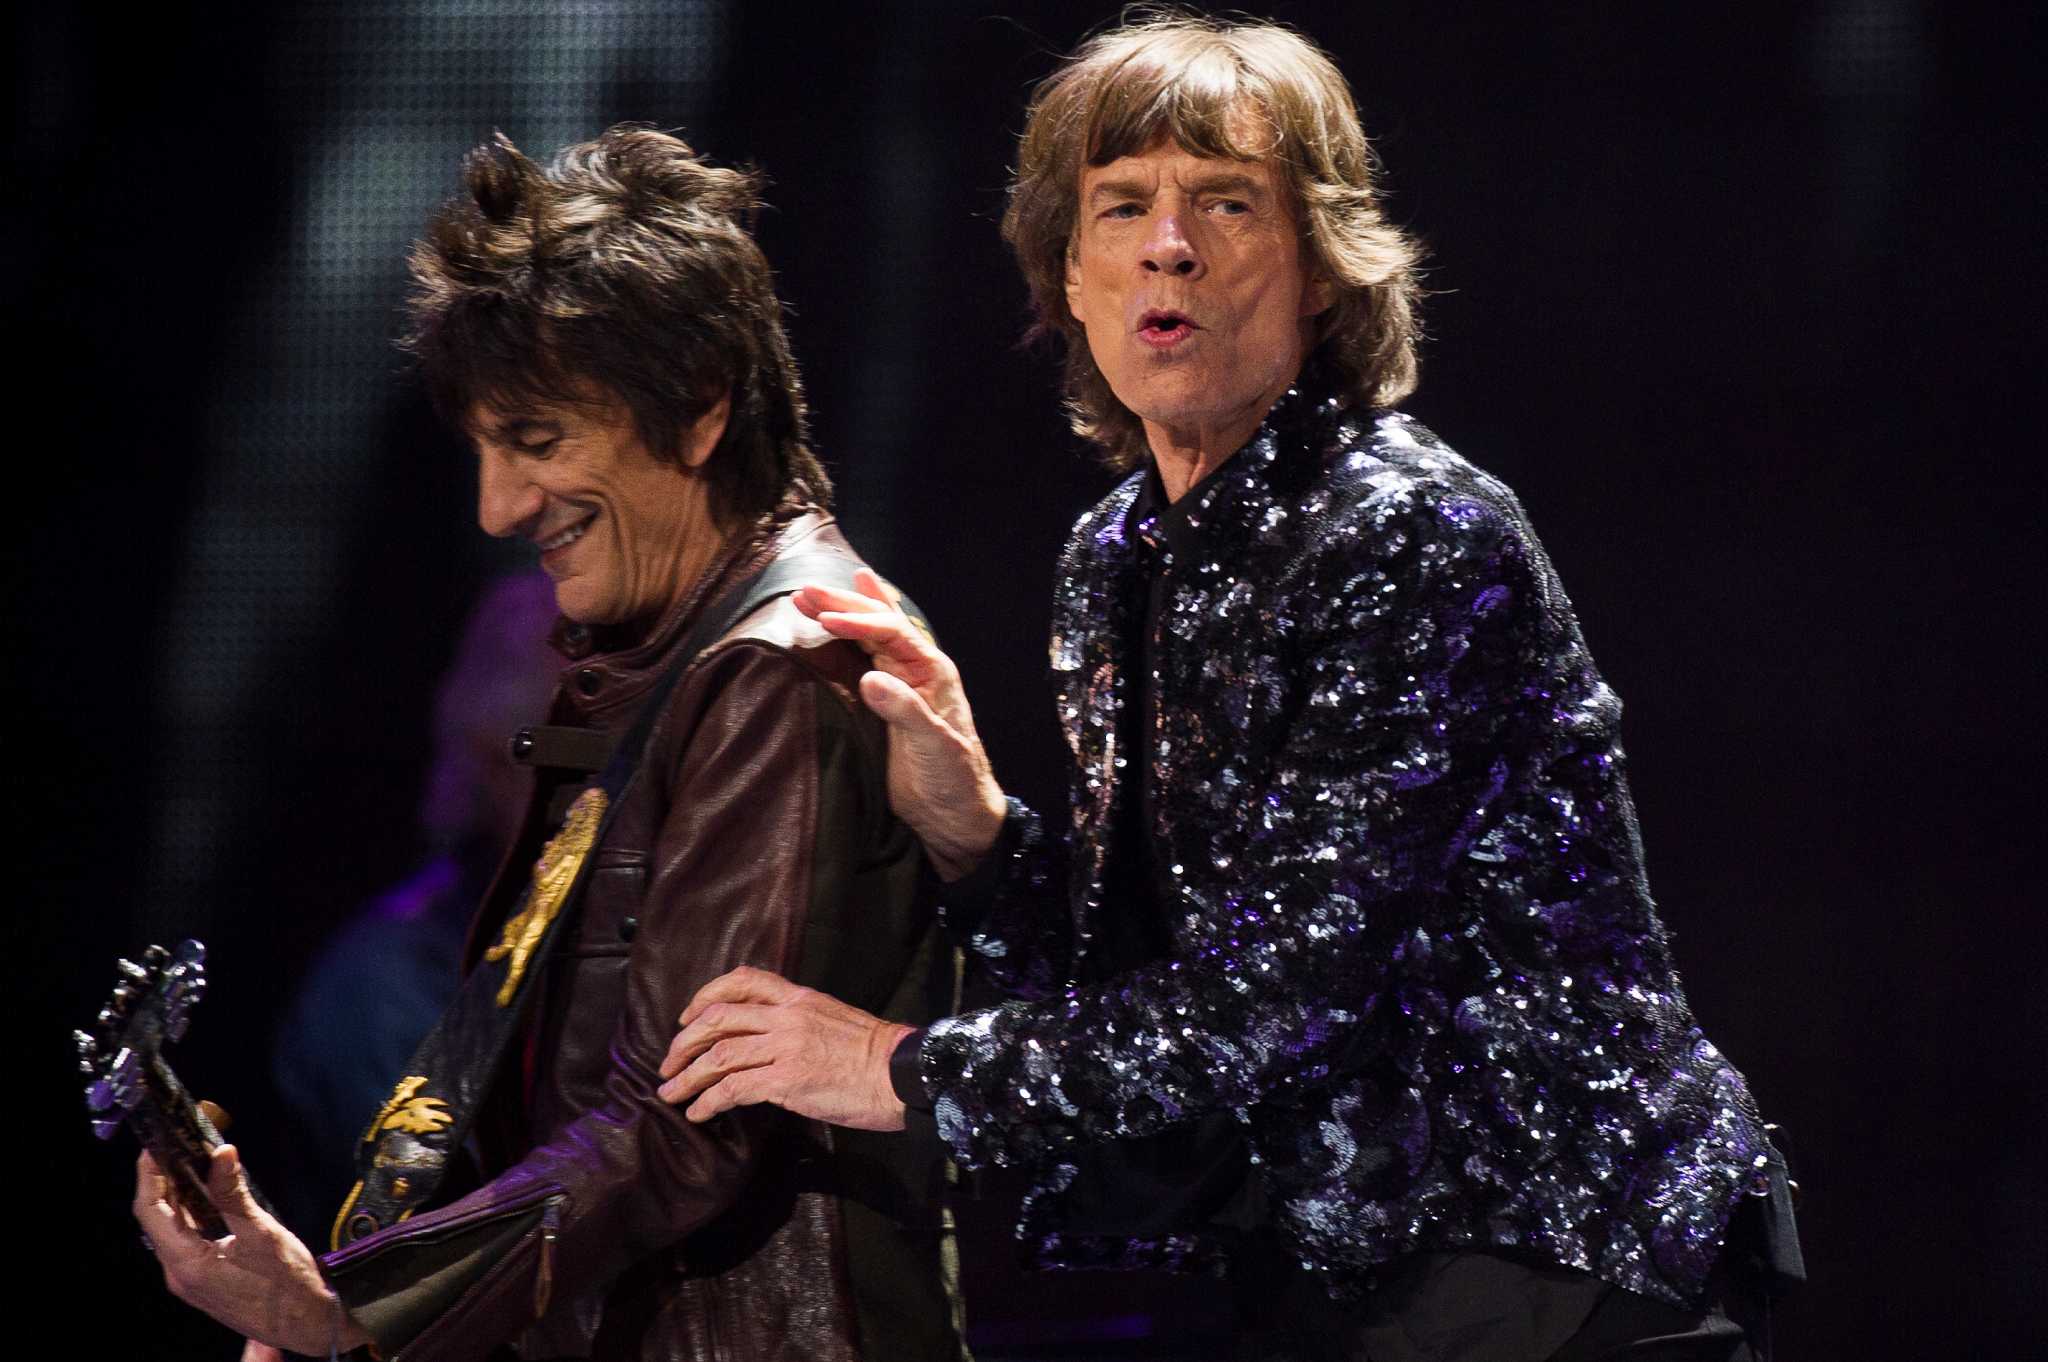 Rolling Stones 50th anniversary tour in New York City